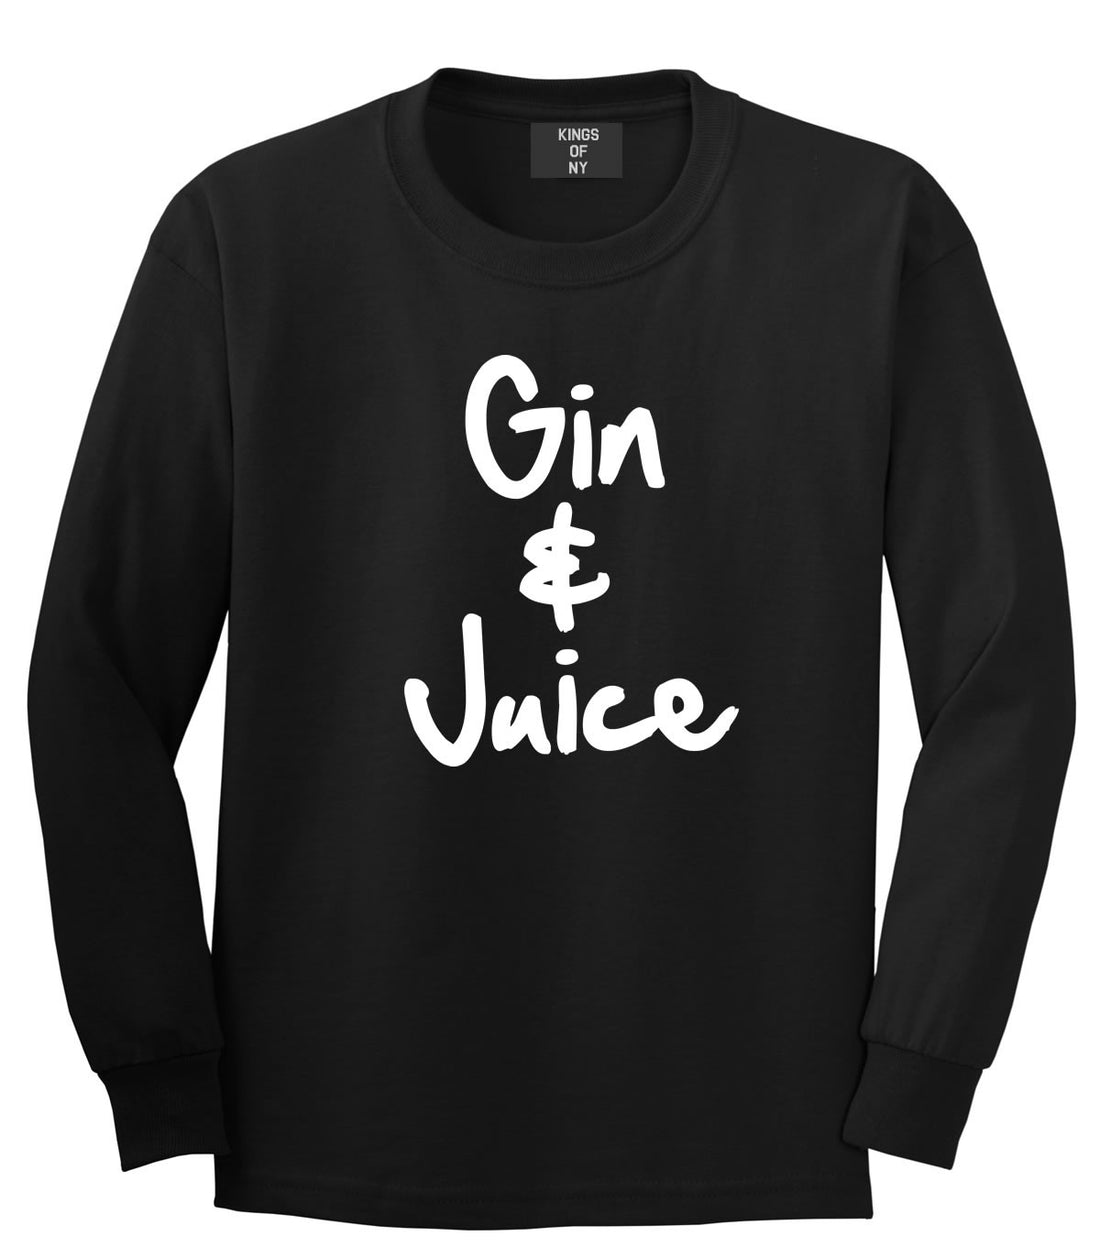 Kings Of NY Gin and Juice Long Sleeve T-Shirt in Black